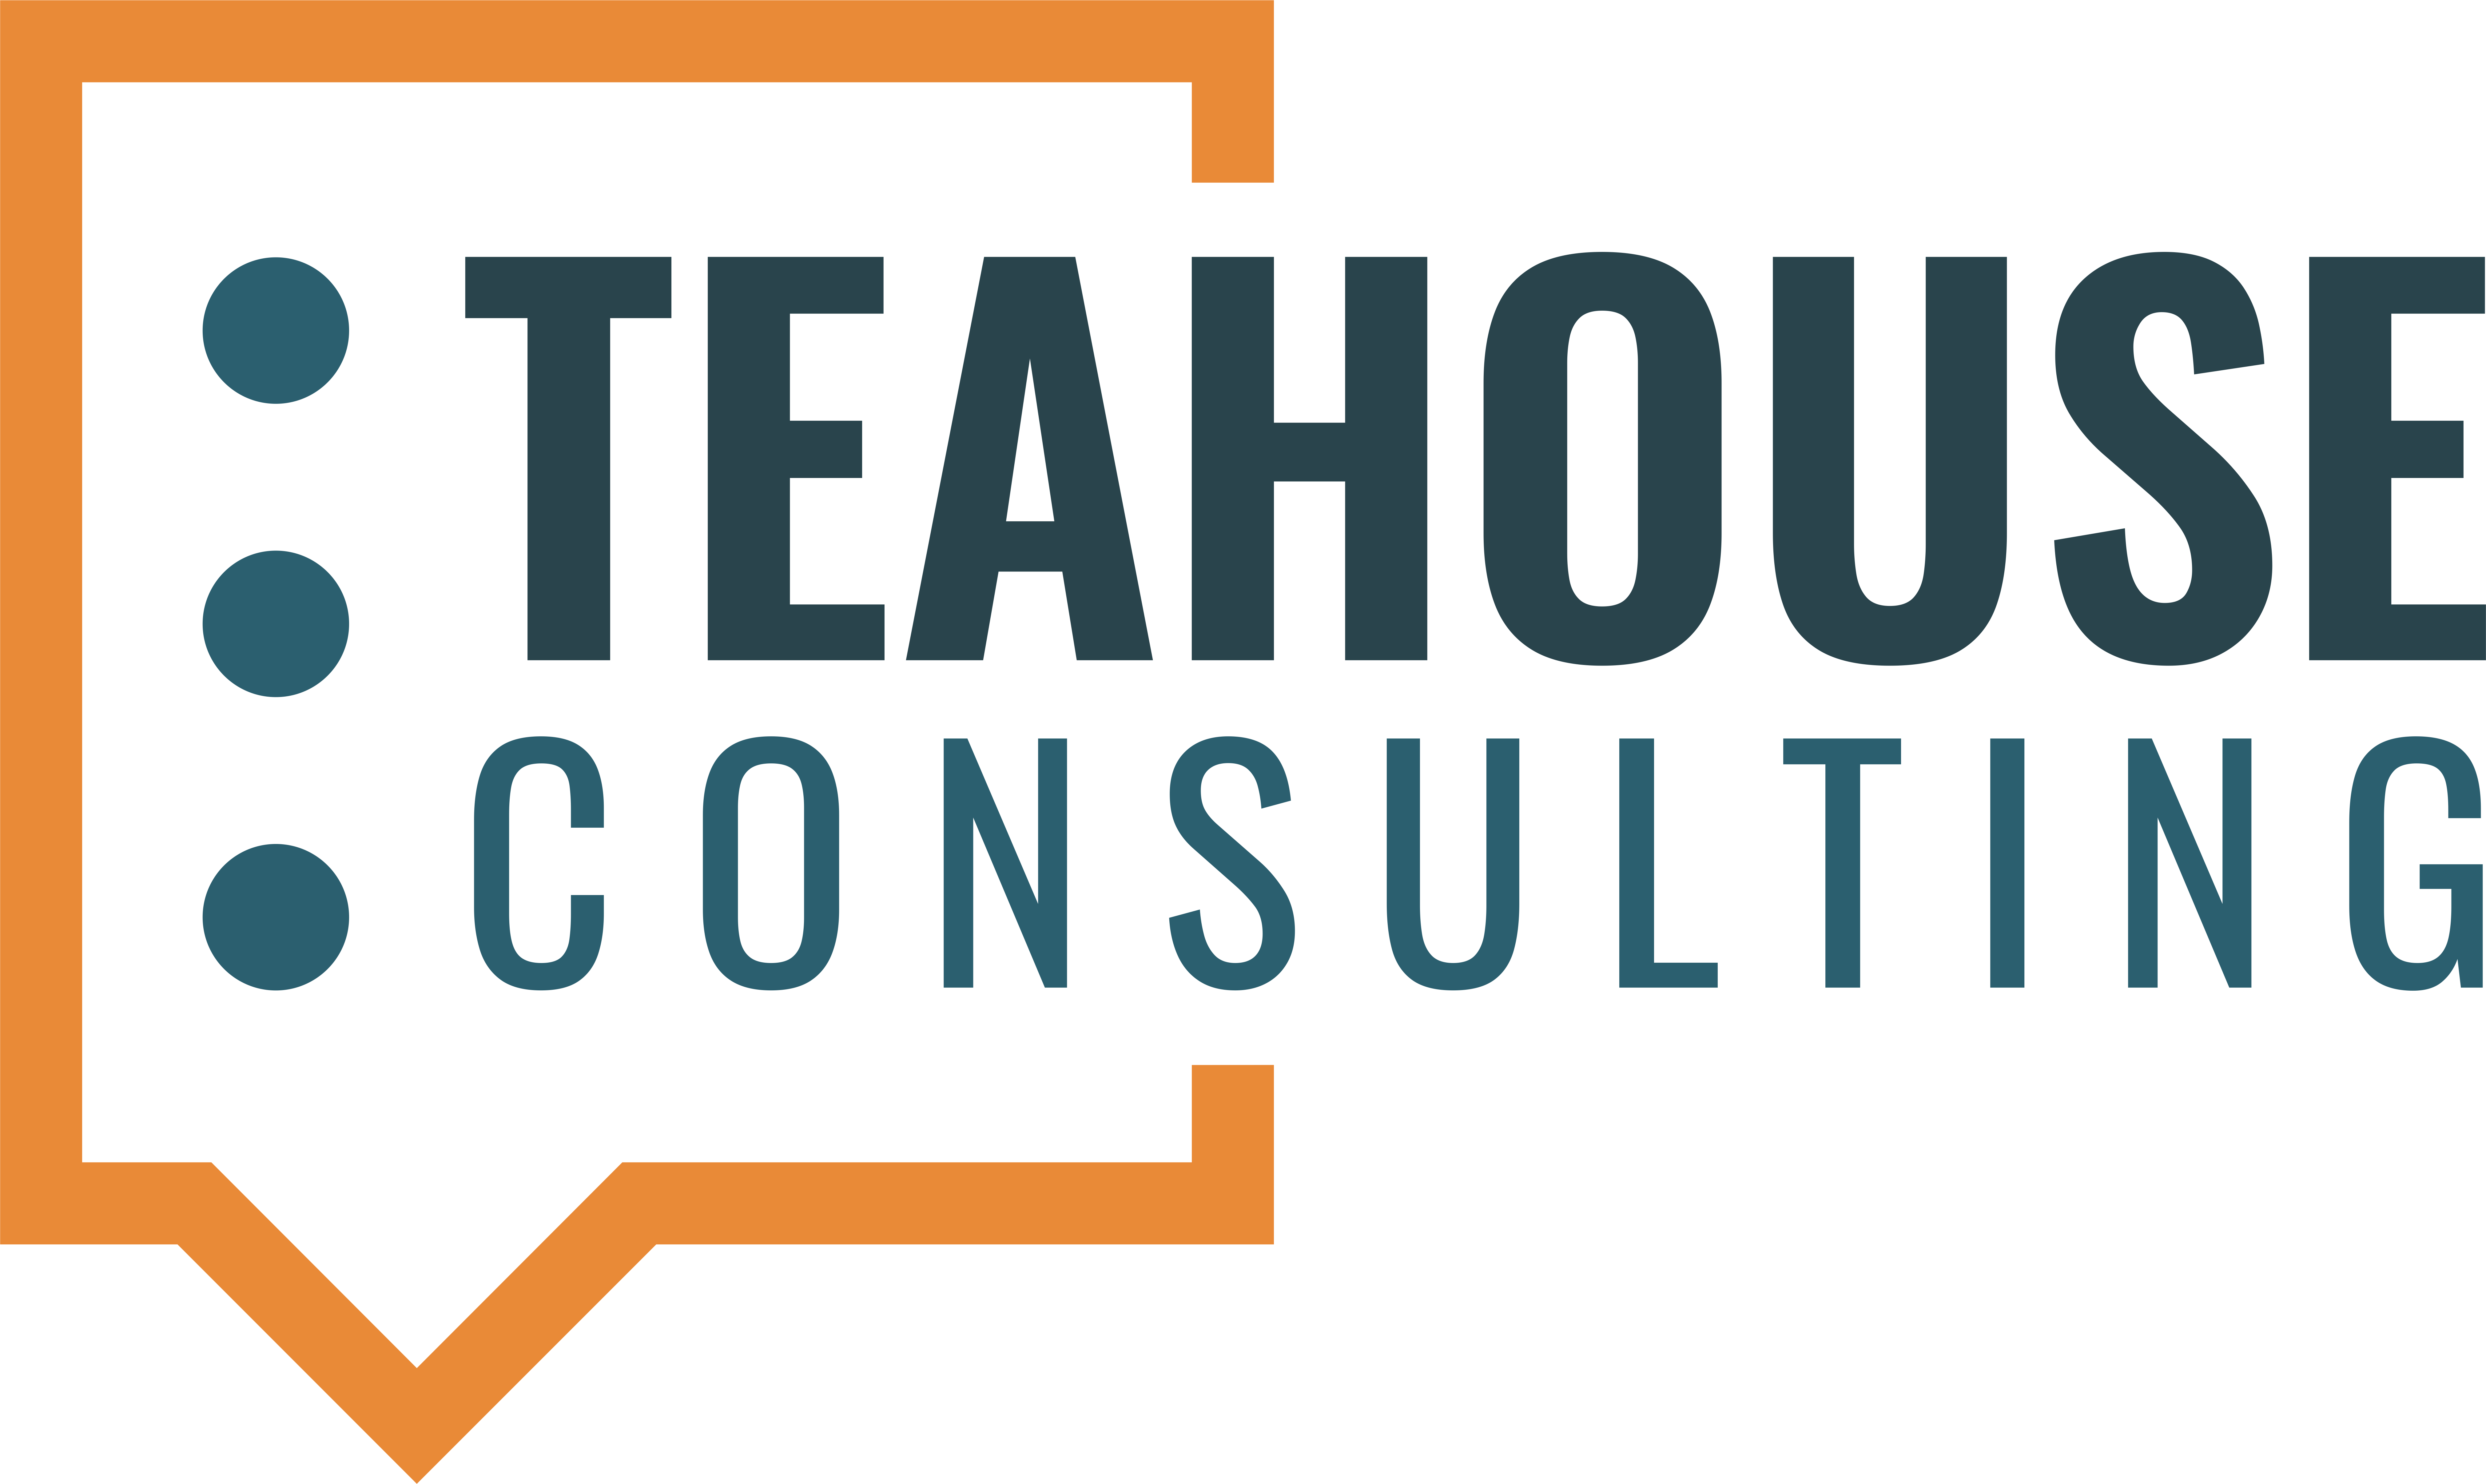 Teahouse Consulting